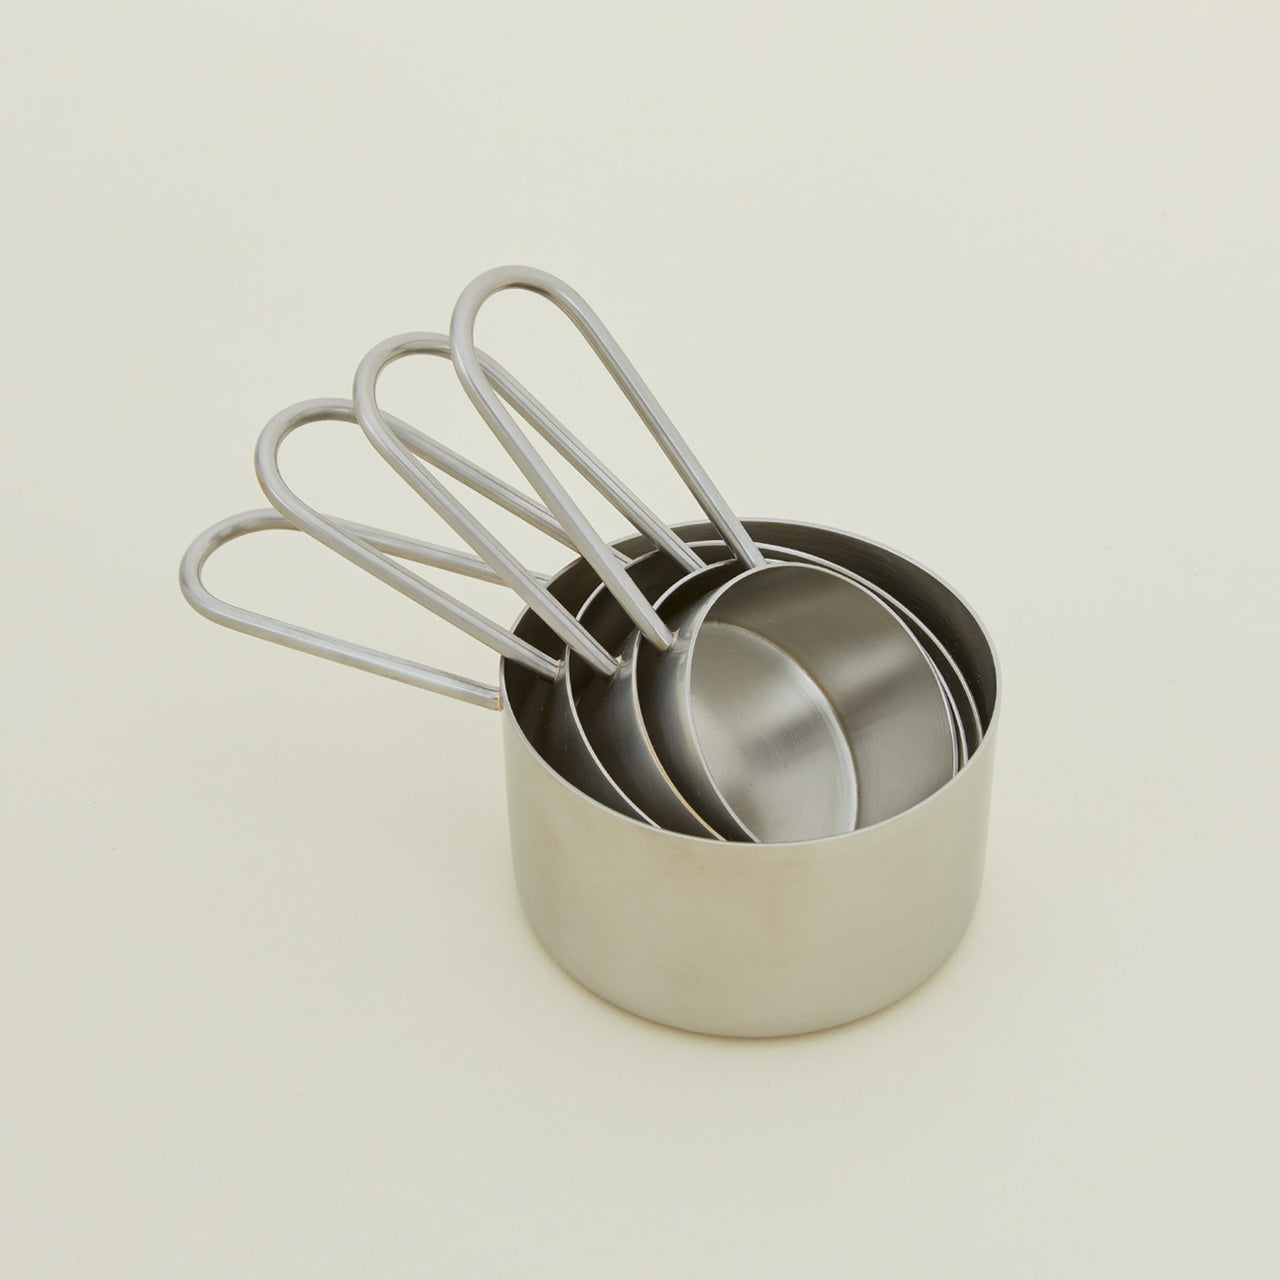 SIMPLE MEASURING CUPS - STAINLESS